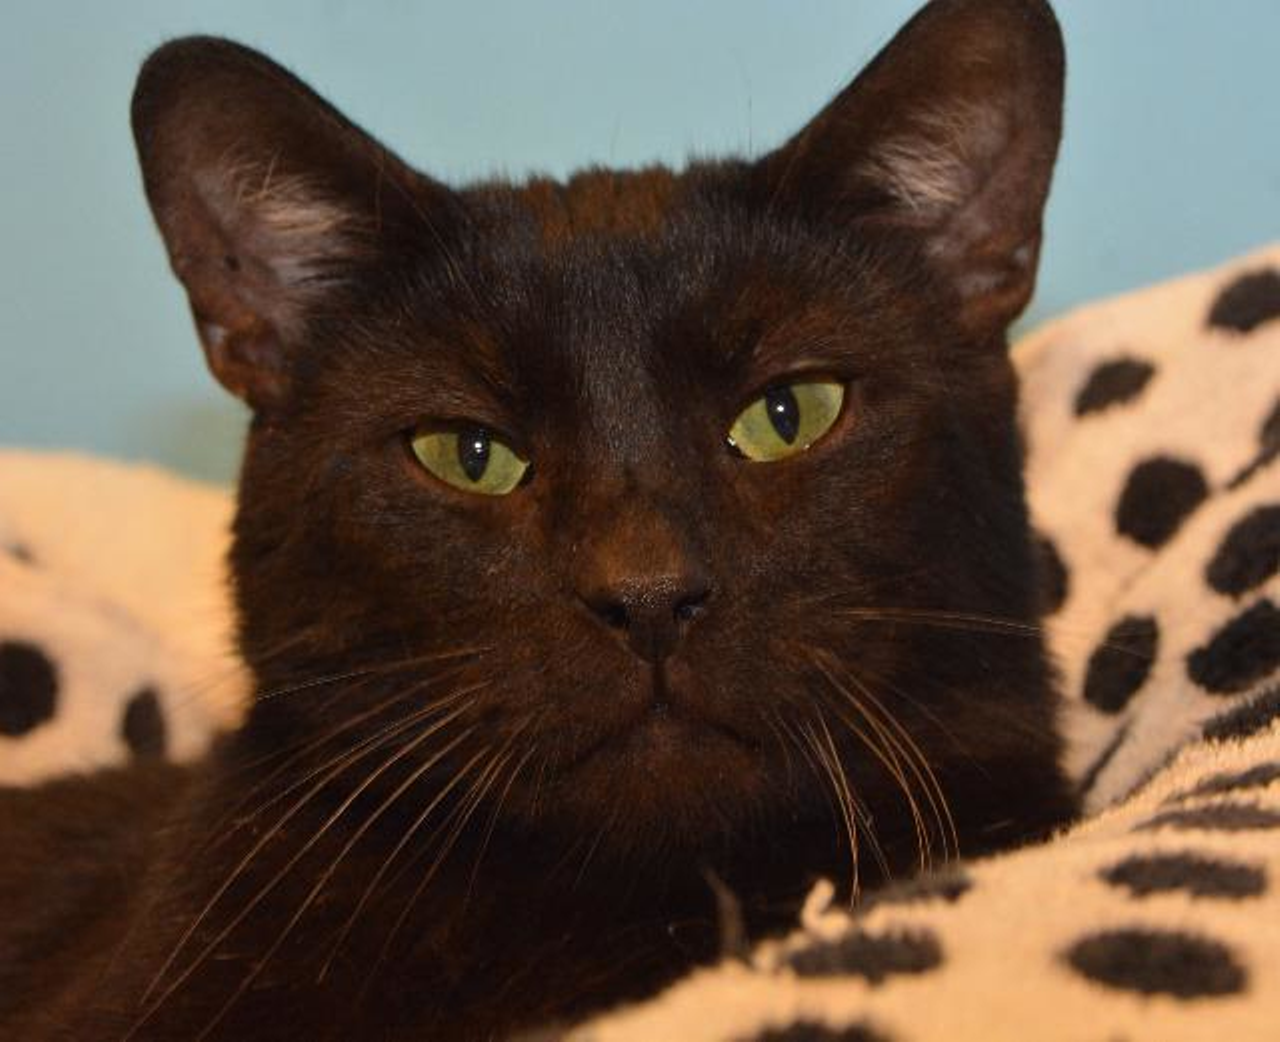 Name: Holden | Breed: Domestic Short Hair | Age: 6 years old | Sex: Male | Rescue: OAR